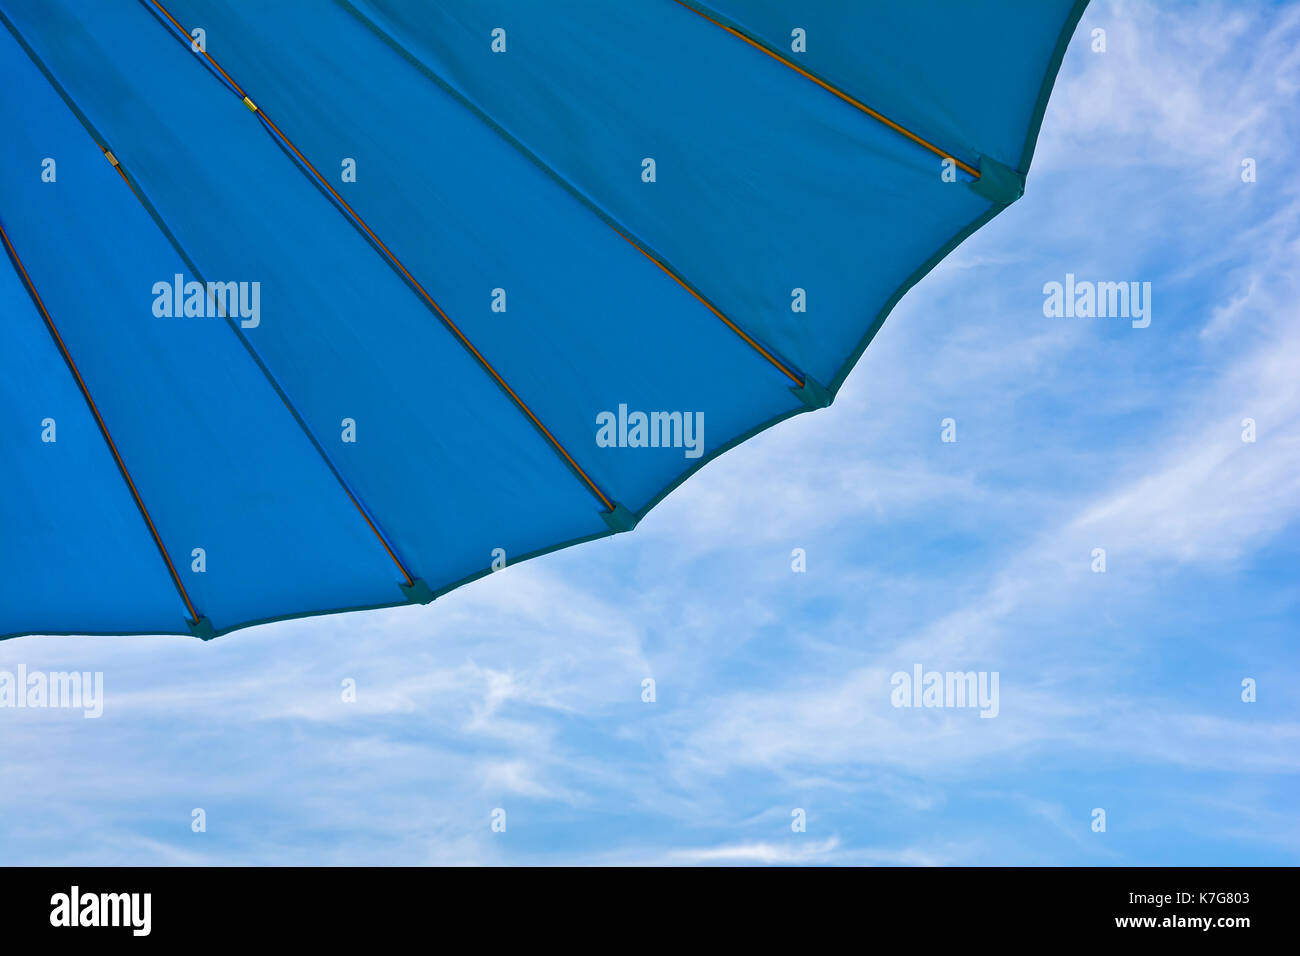 Fragment of a blue garden umbrella against the sky with clouds. Stock Photo